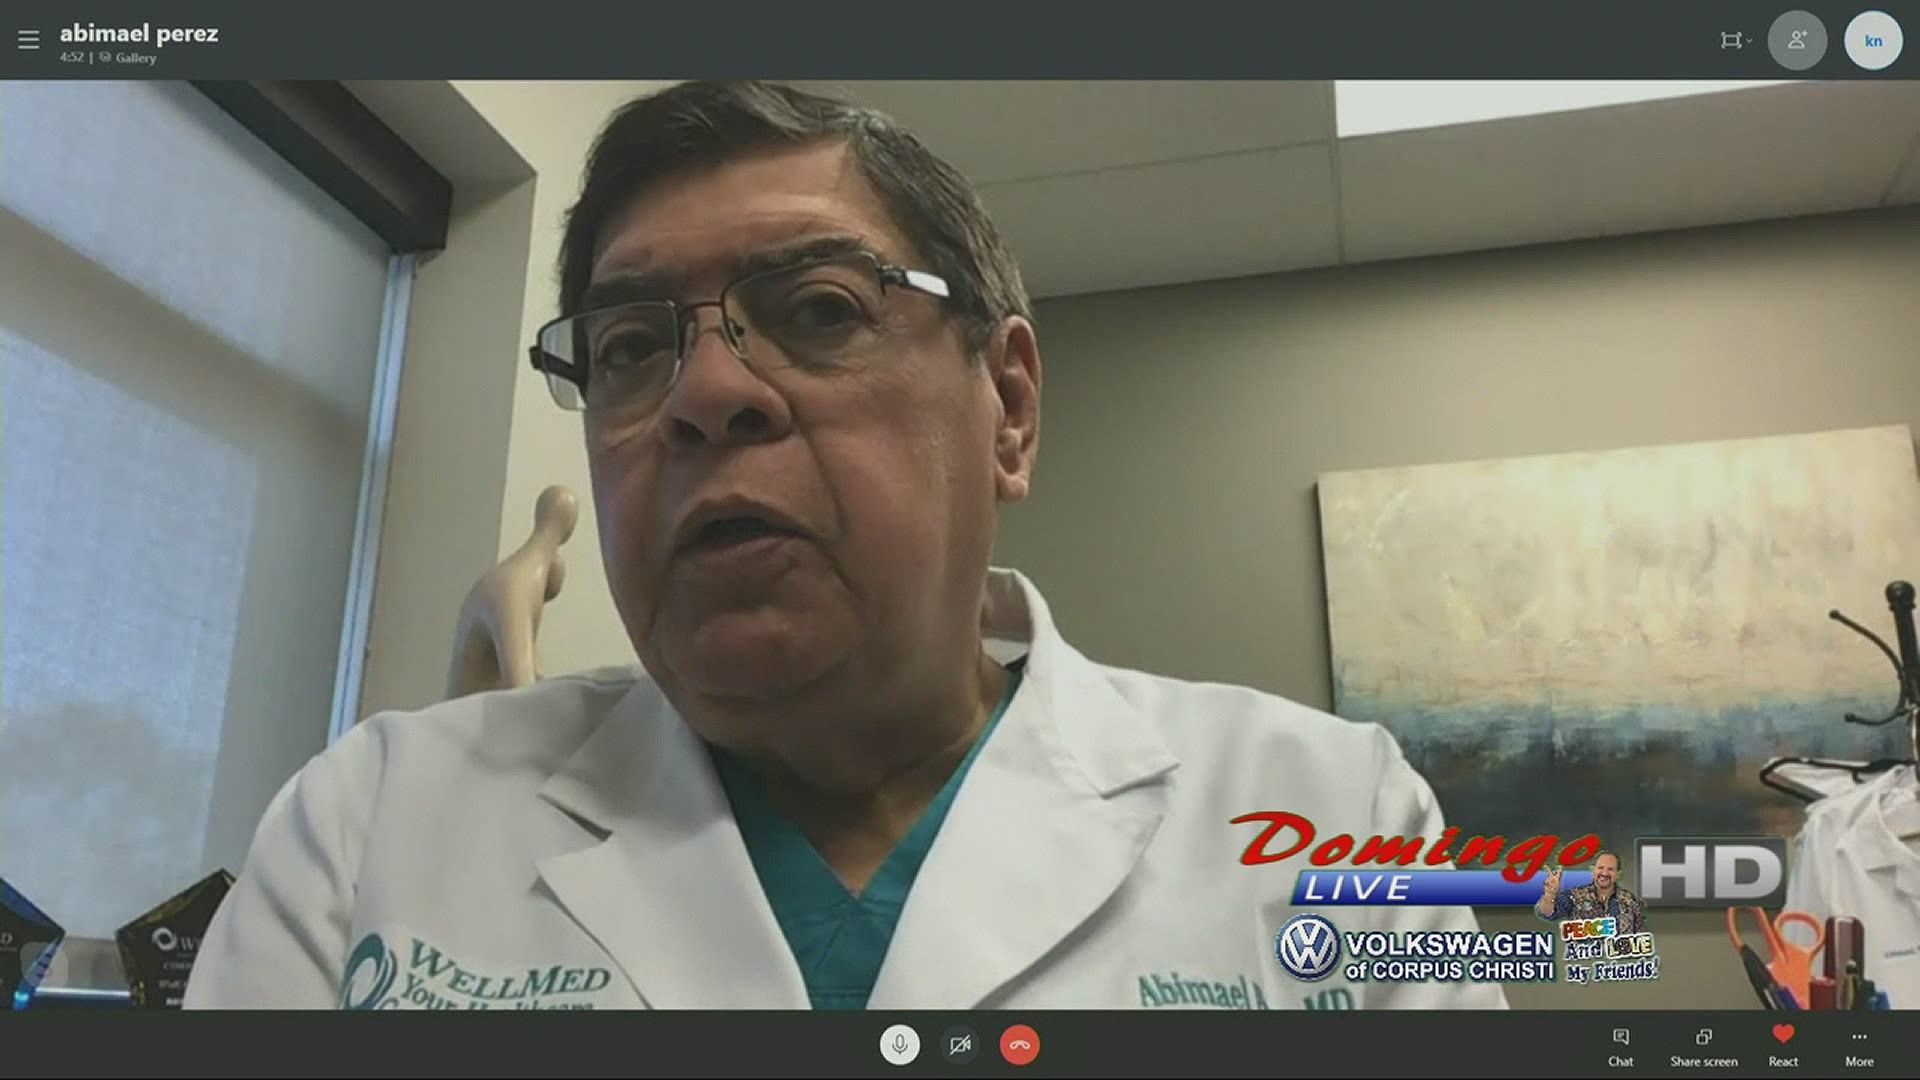 Rudy Trevino and Barbi Leo interview Dr. Abimael Perez regarding Covid-19 info and facts.